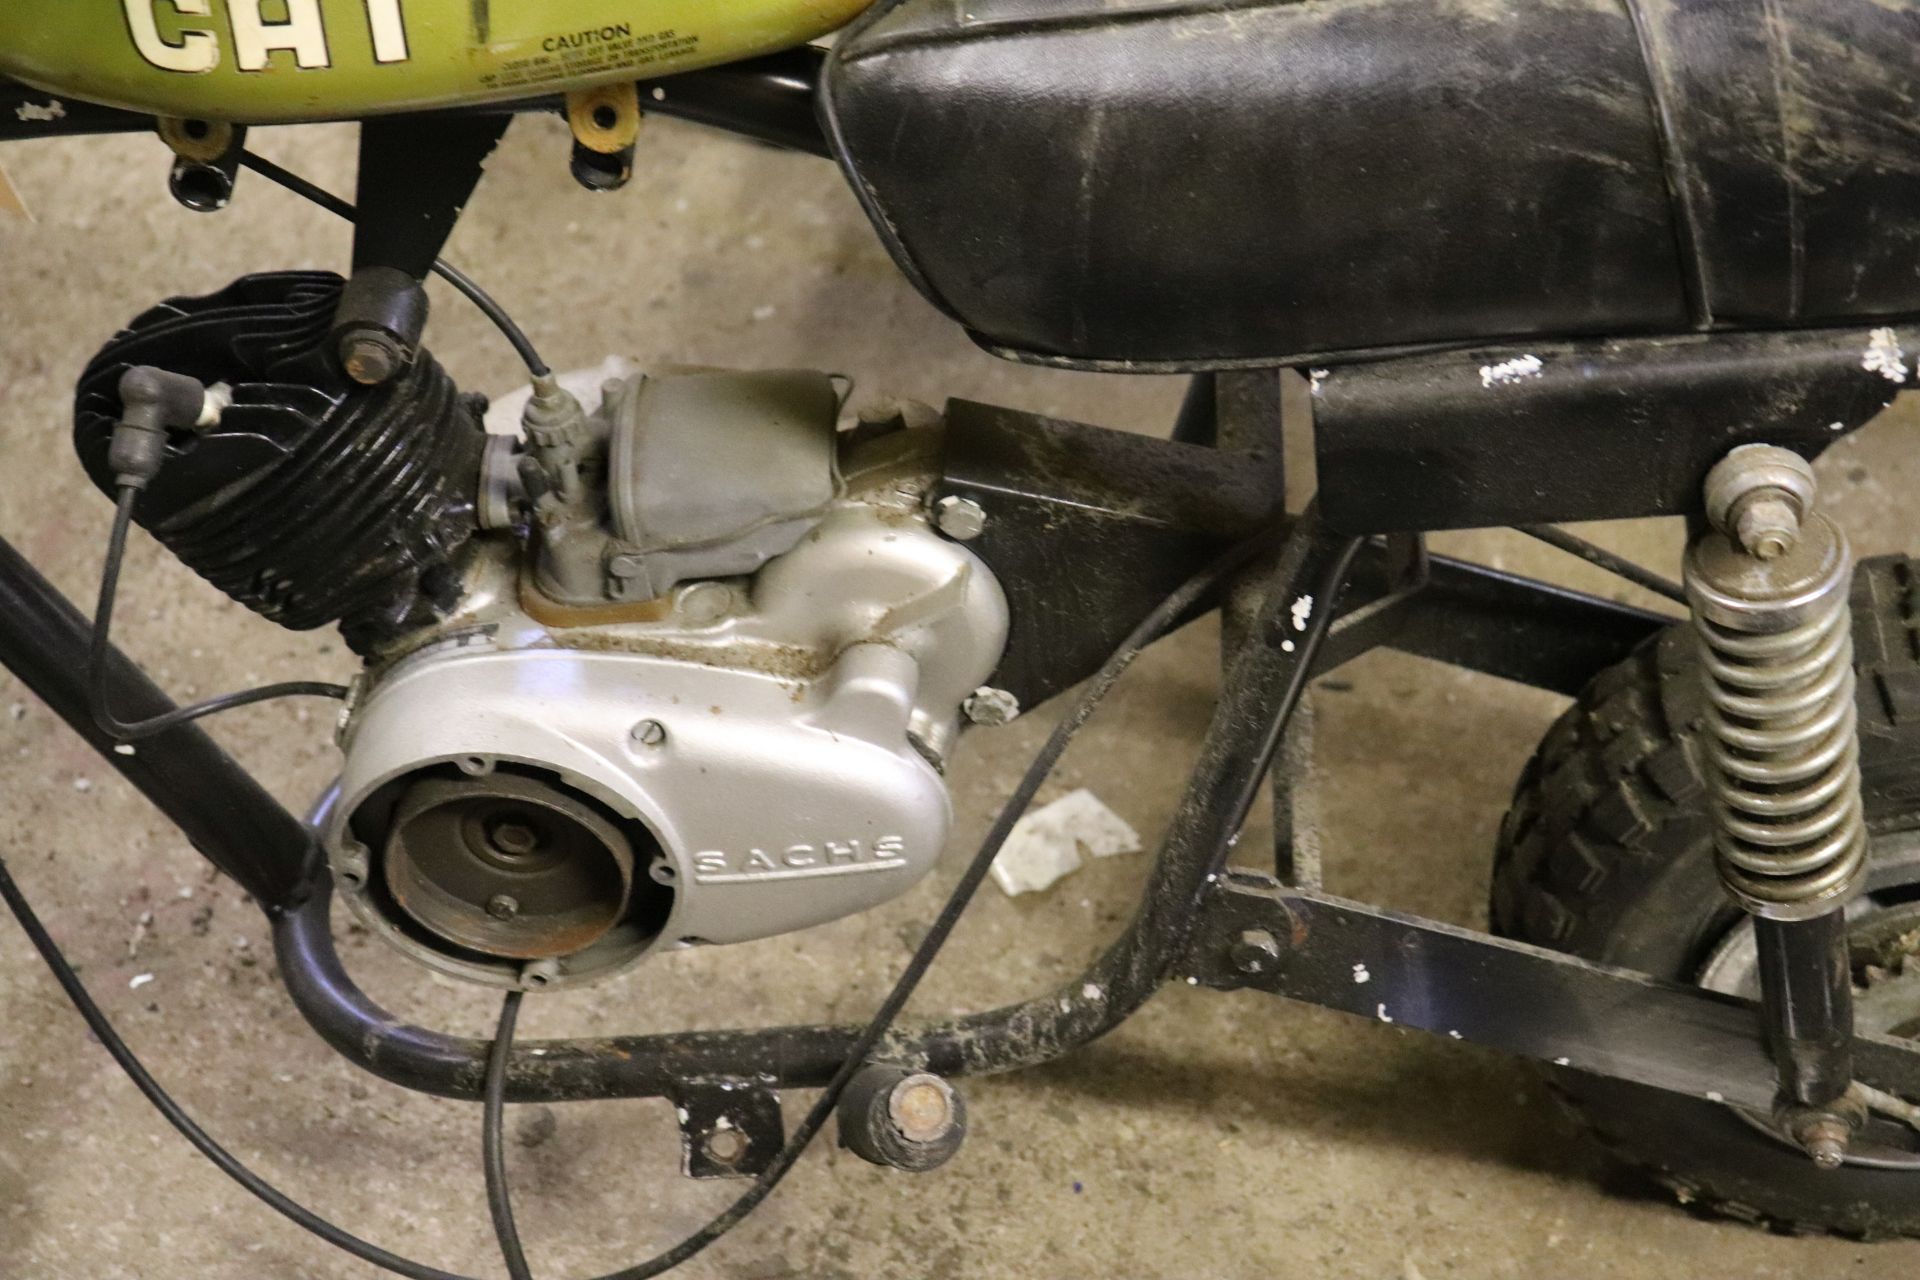 1971 Arctic Cat Whisker, model 2328-001 MINI BIKES MARKED AS PARTS BIKES, NOT OPERATIONAL, CONDITION - Image 2 of 5